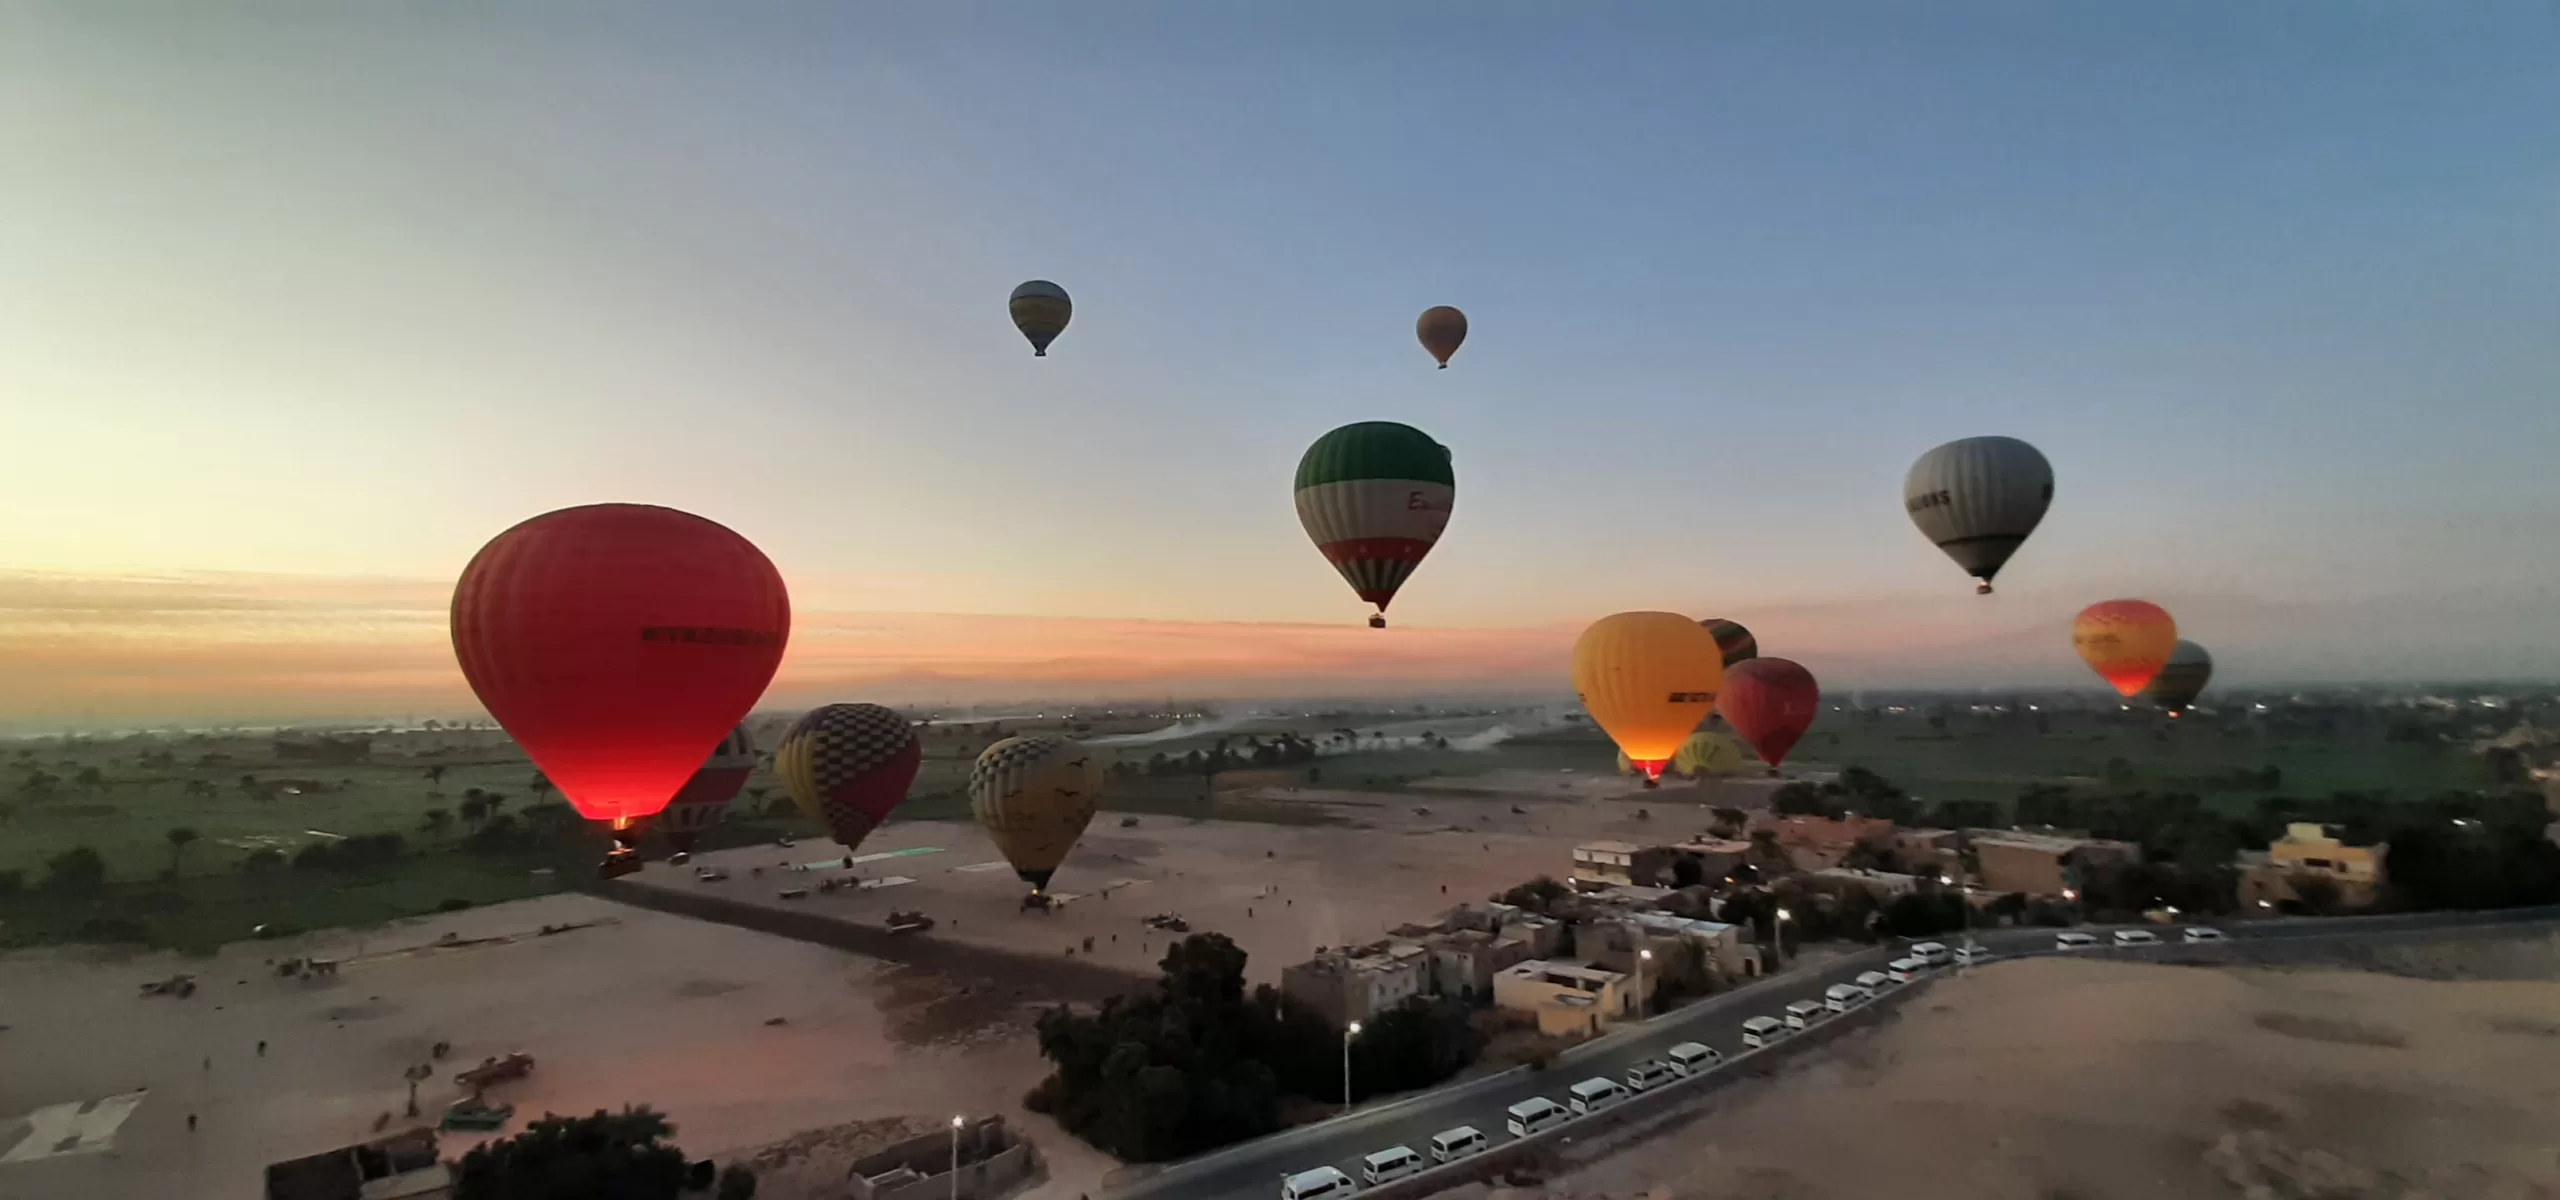 Incredible sights during a hot air balloon ride in Luxor.